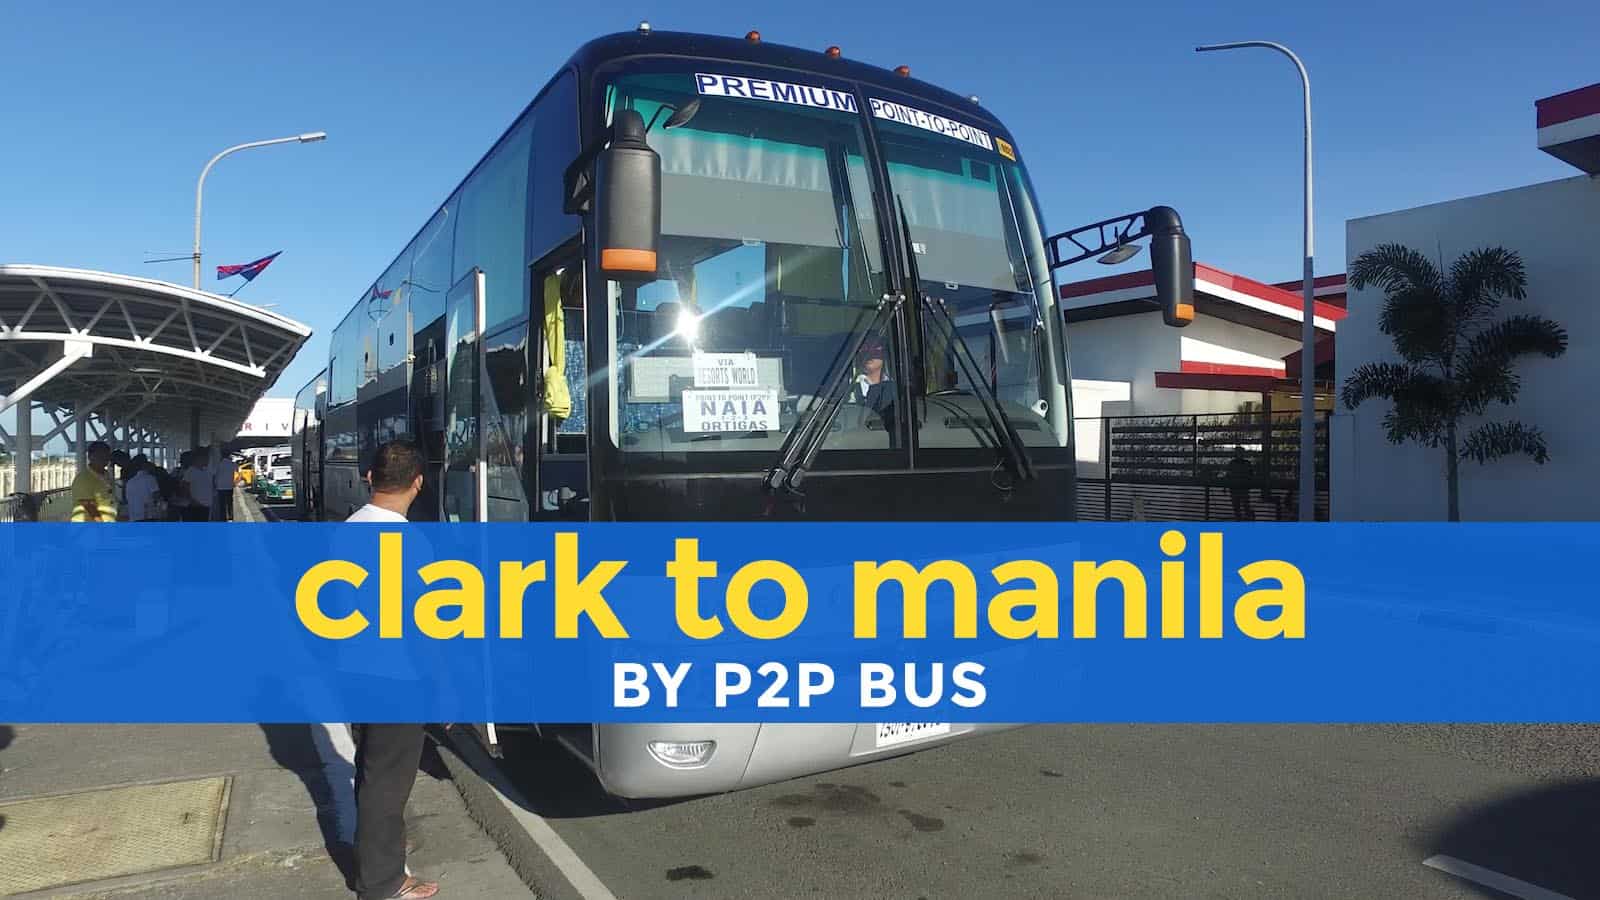 How to Get from CLARK AIRPORT to MANILA: The Easiest Way (P2P Bus)